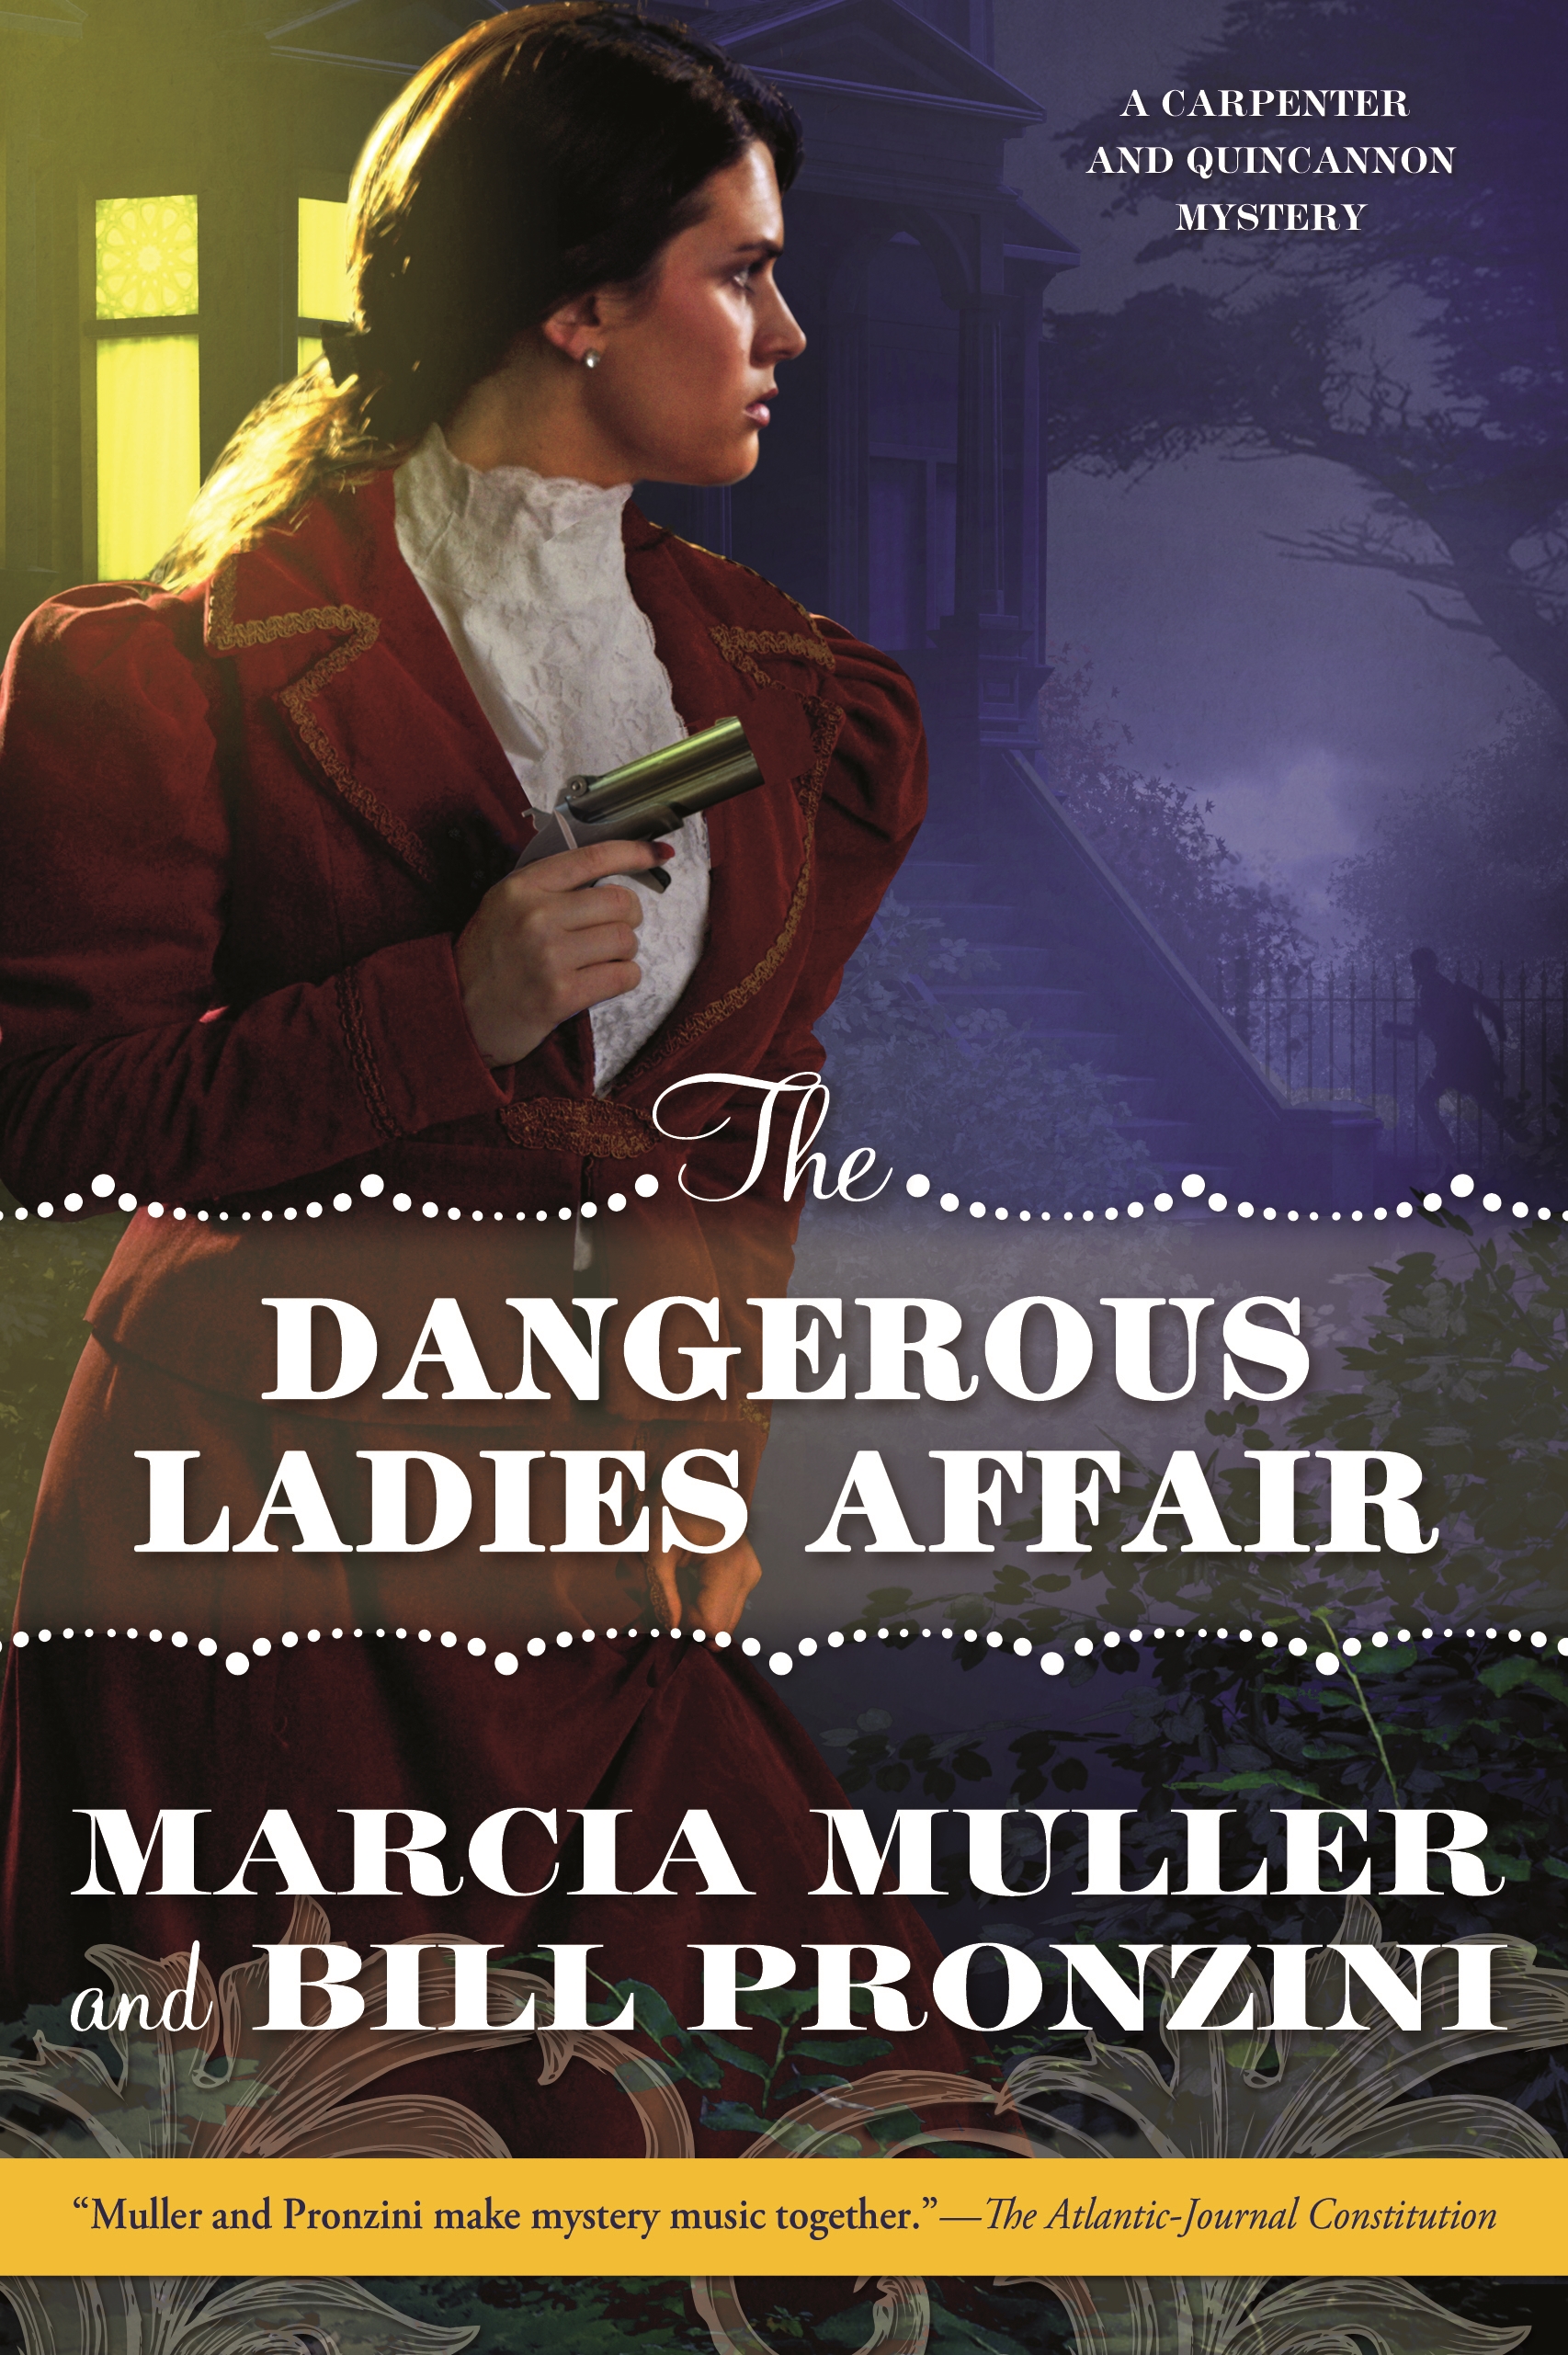 The Dangerous Ladies Affair : A Carpenter and Quincannon Mystery by Marcia Muller, Bill Pronzini